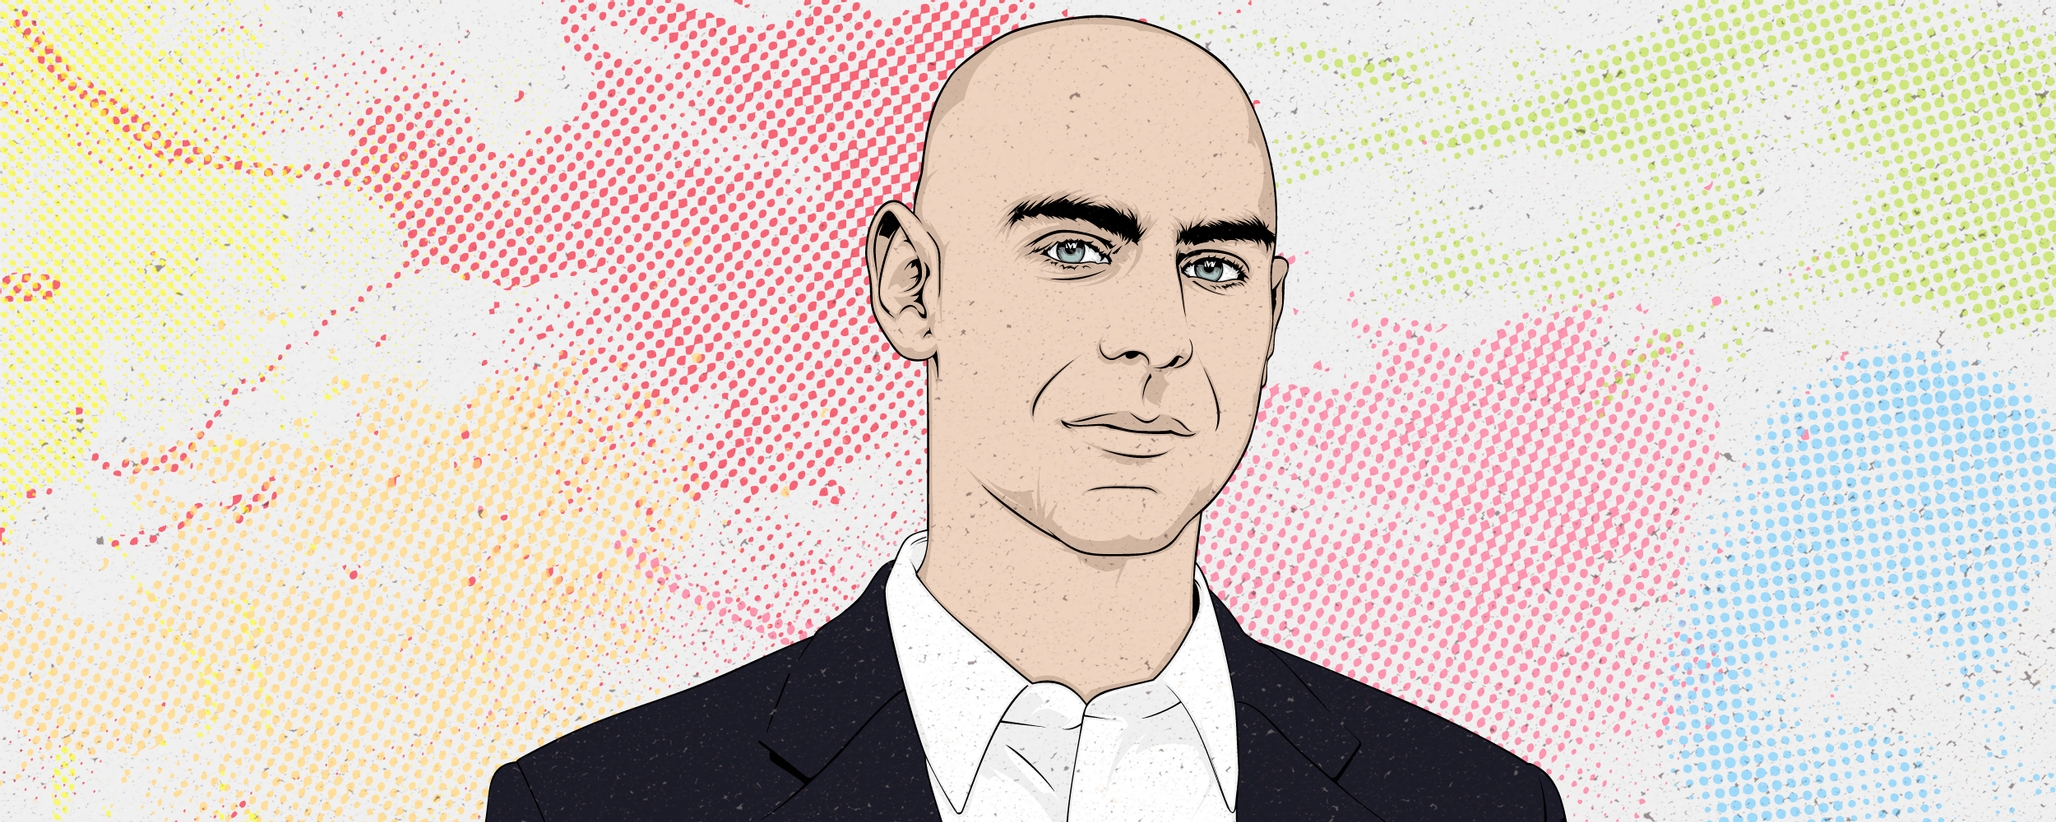 Cover image for Adam Grant On Interviewing to Hire Trailblazers, Nonconformists and Originals